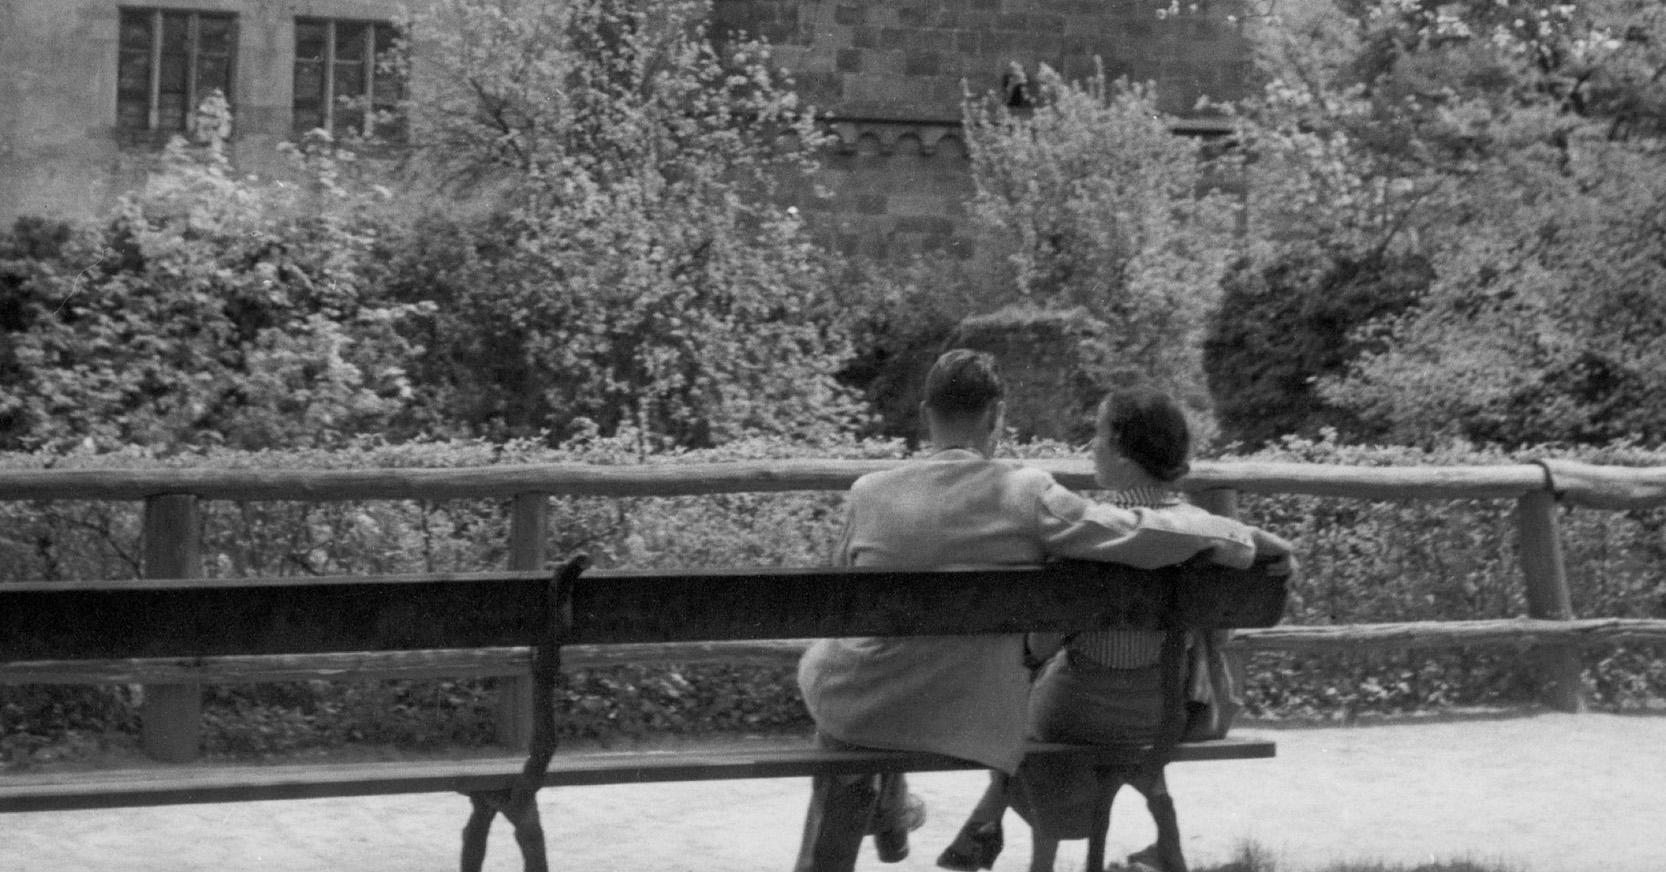 Couple on a bench front of Heidelberg castle, Germany 1936, Printed Later  - Photograph by Karl Heinrich Lämmel